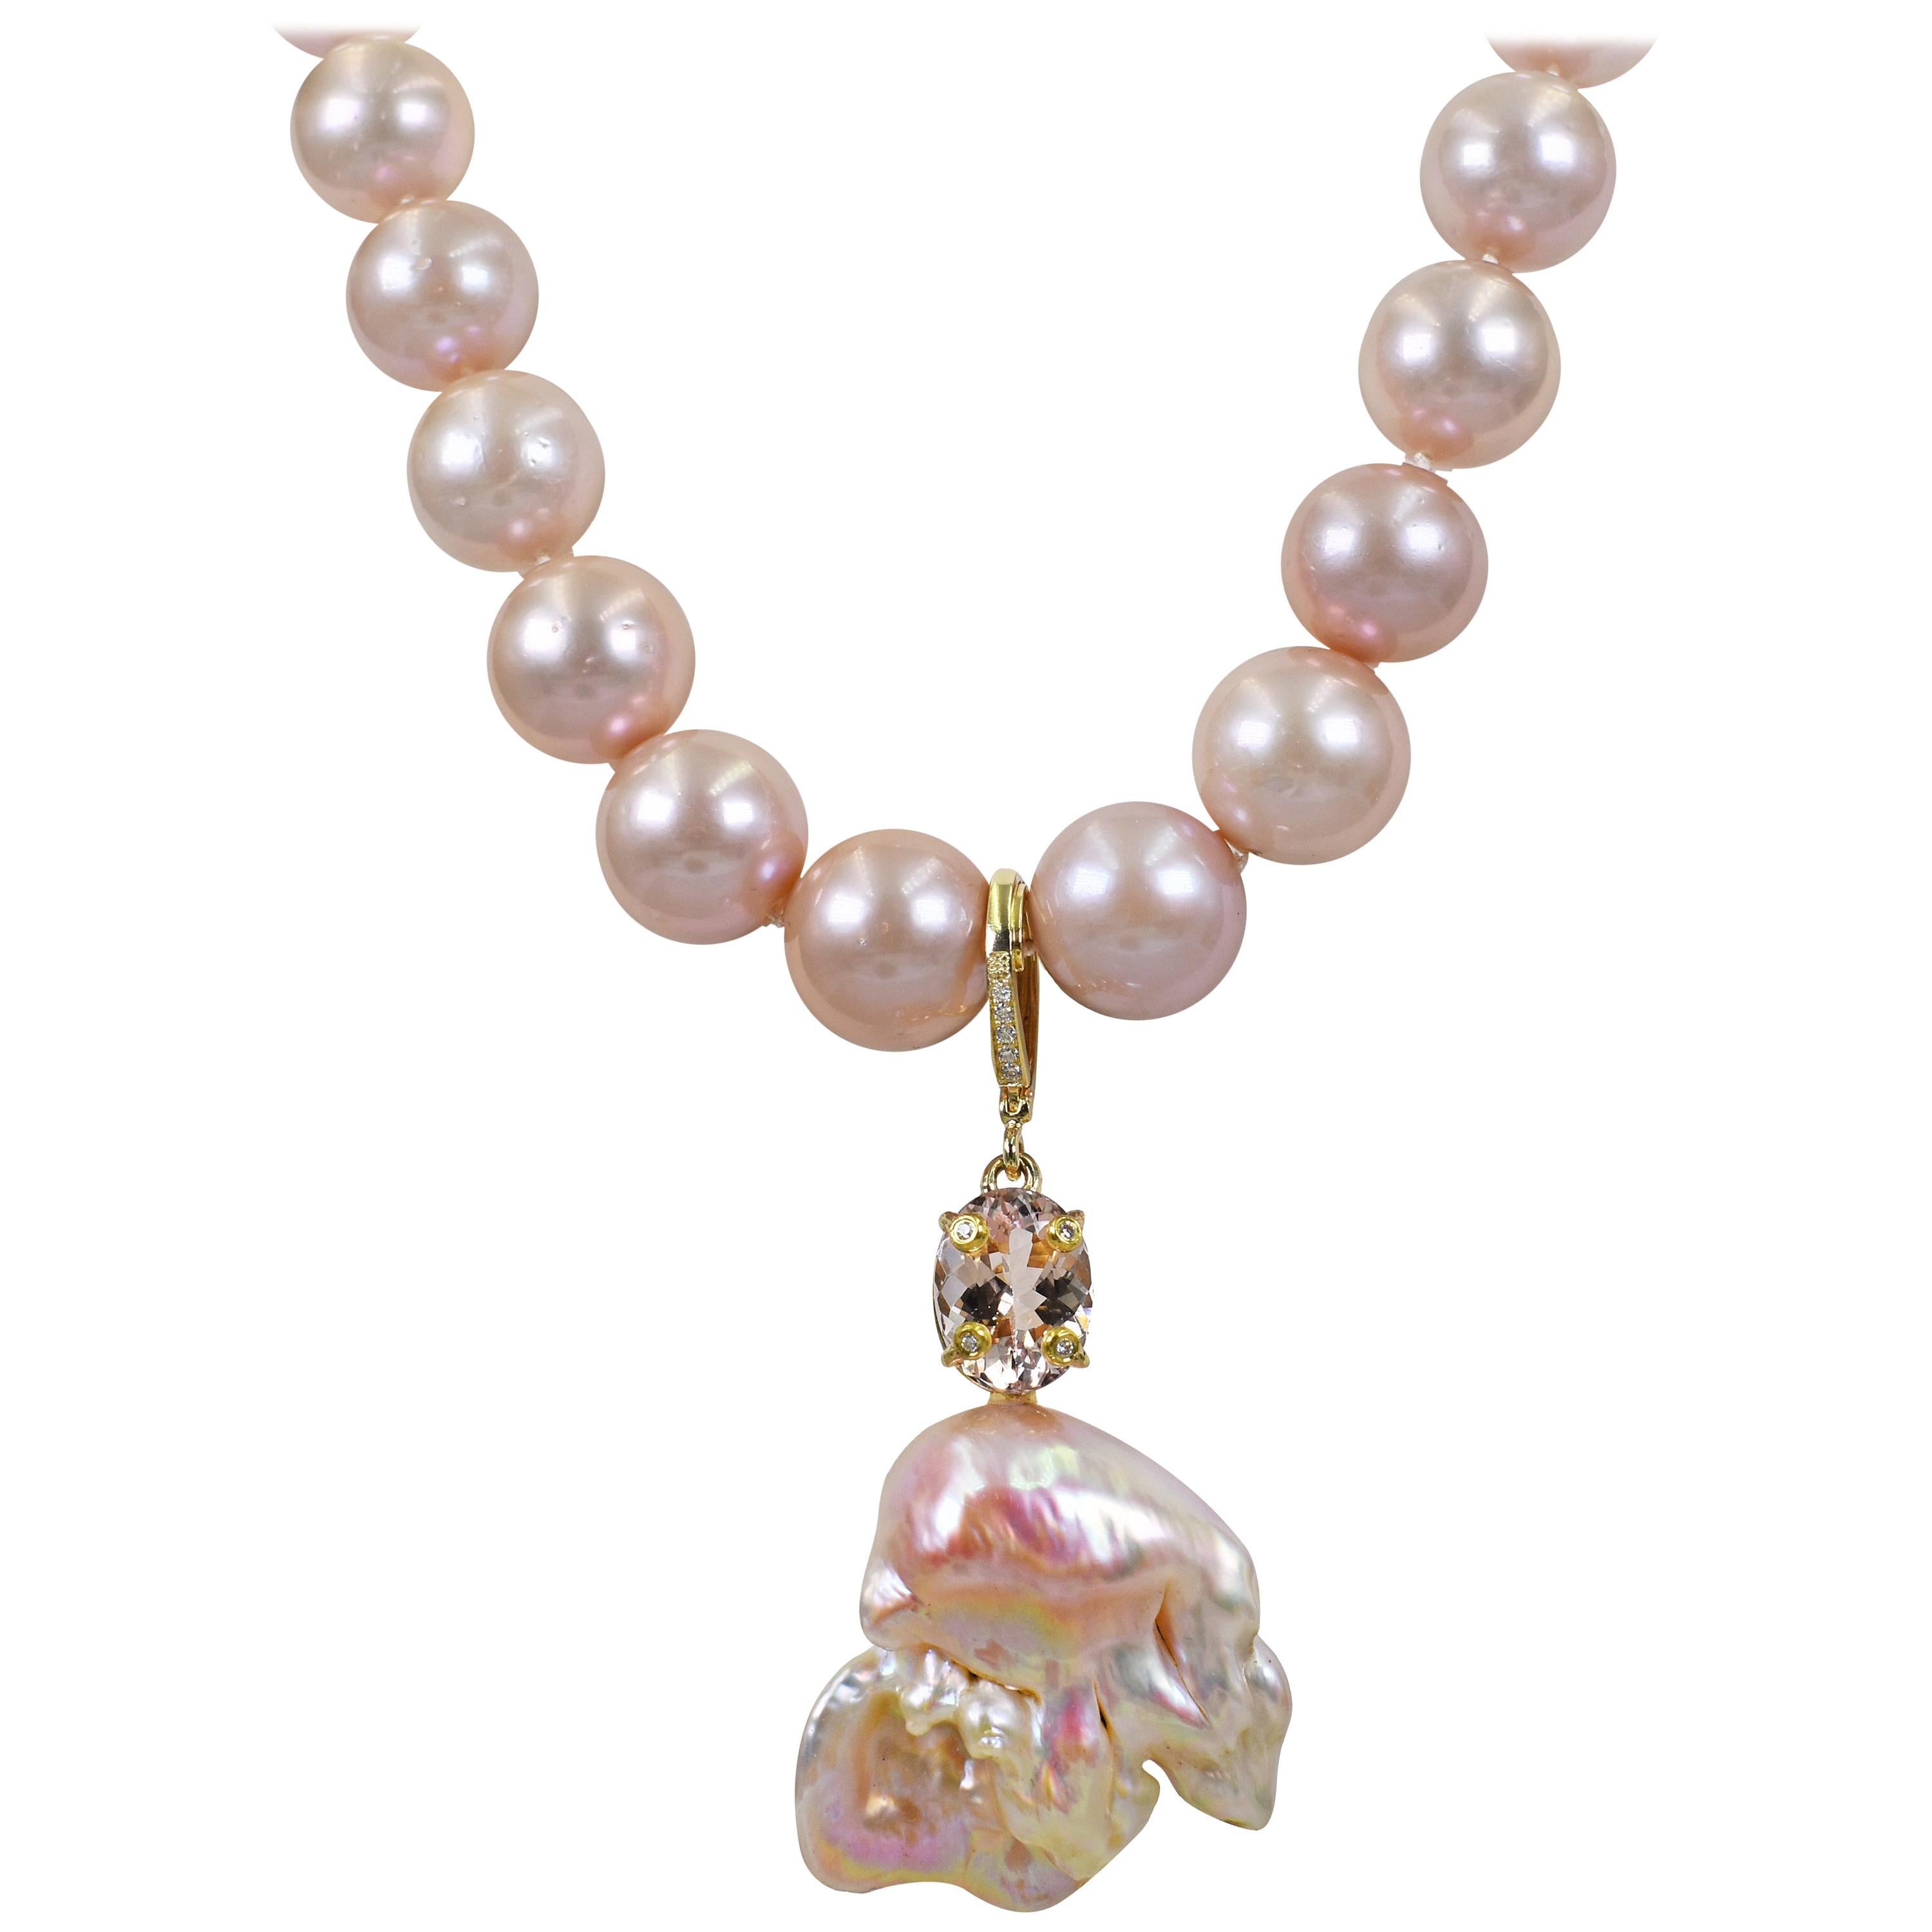 Morganite and Baroque Pearl Pendant on Graduated Pink Pearl Beaded Necklace